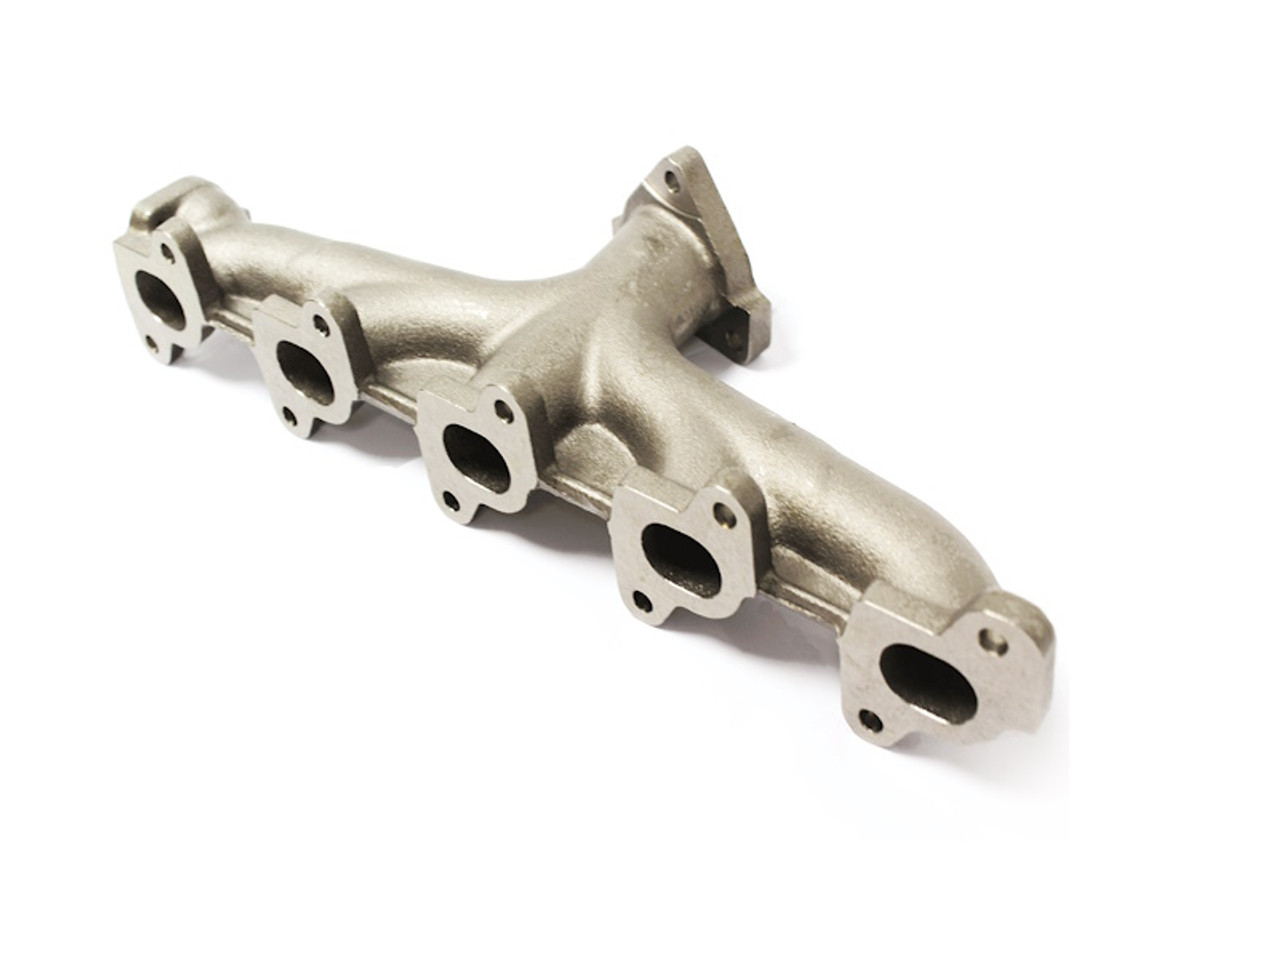 Allmakes 4x4 Discovery 2 Exhaust Manifold - LKC102020